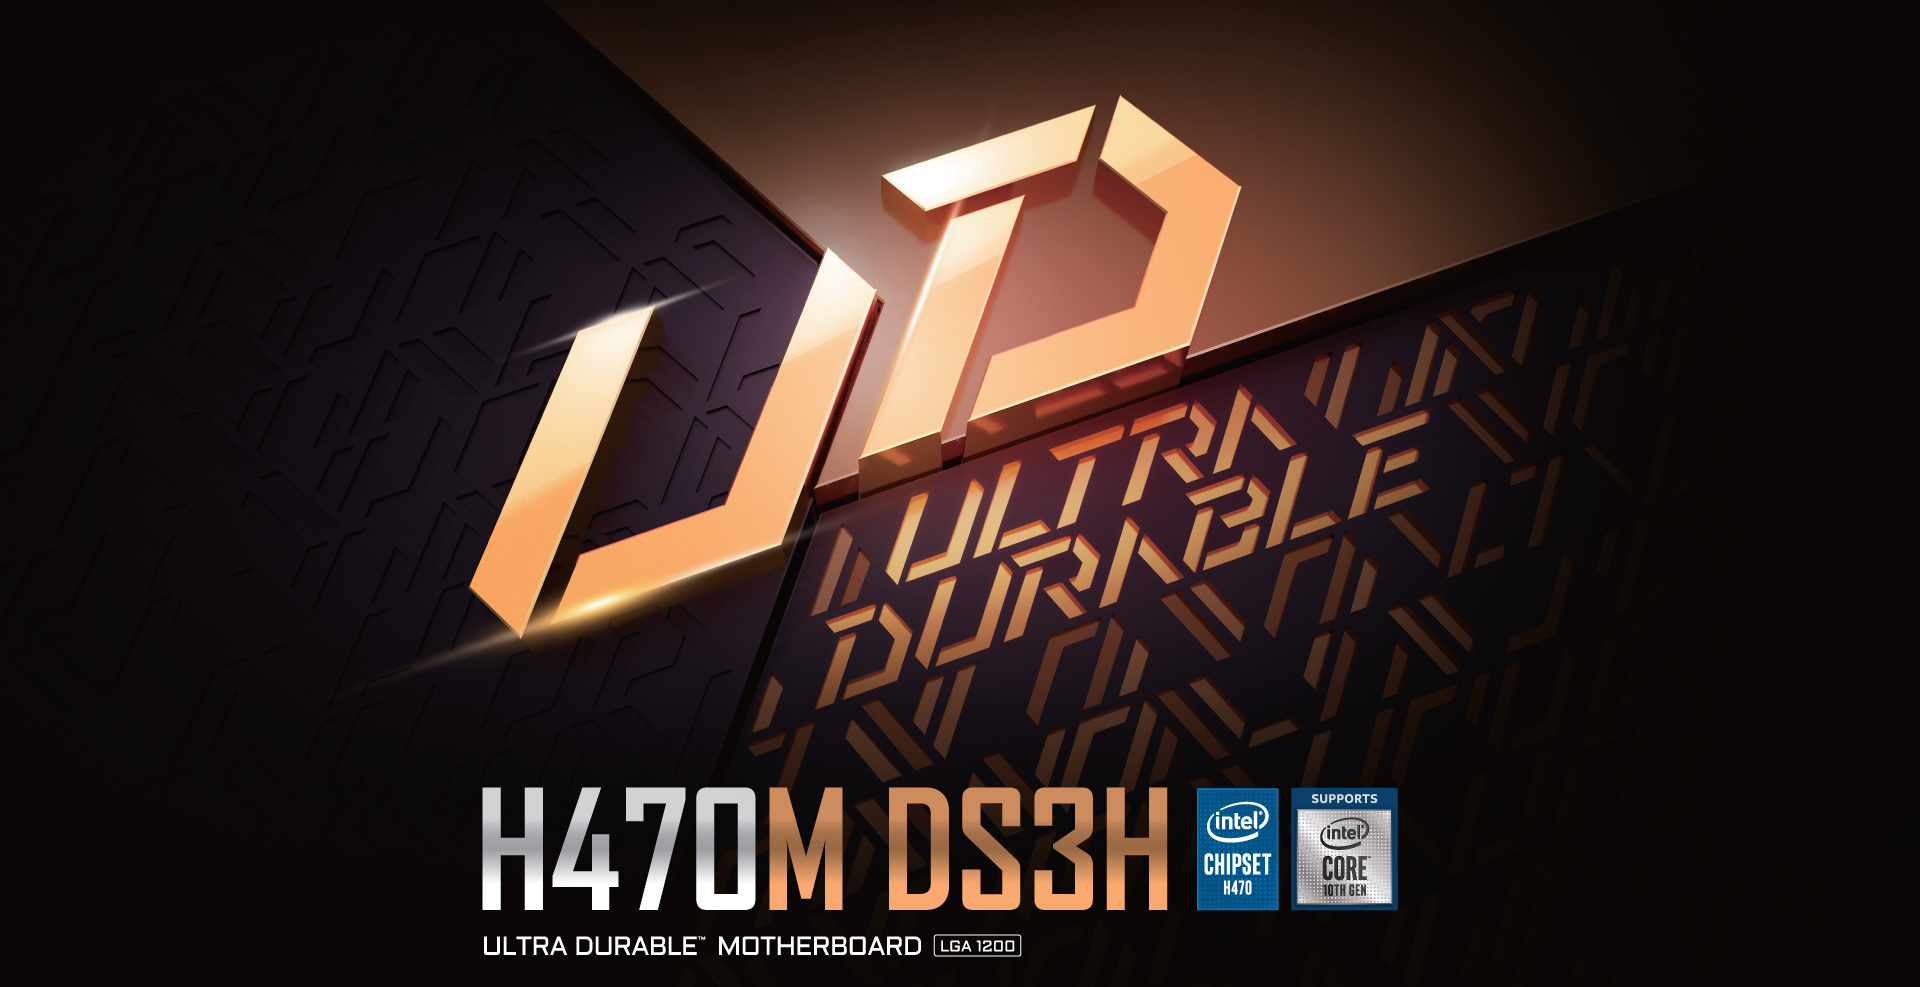 gigabyte-h470m-ds3h-motherboard-specifications